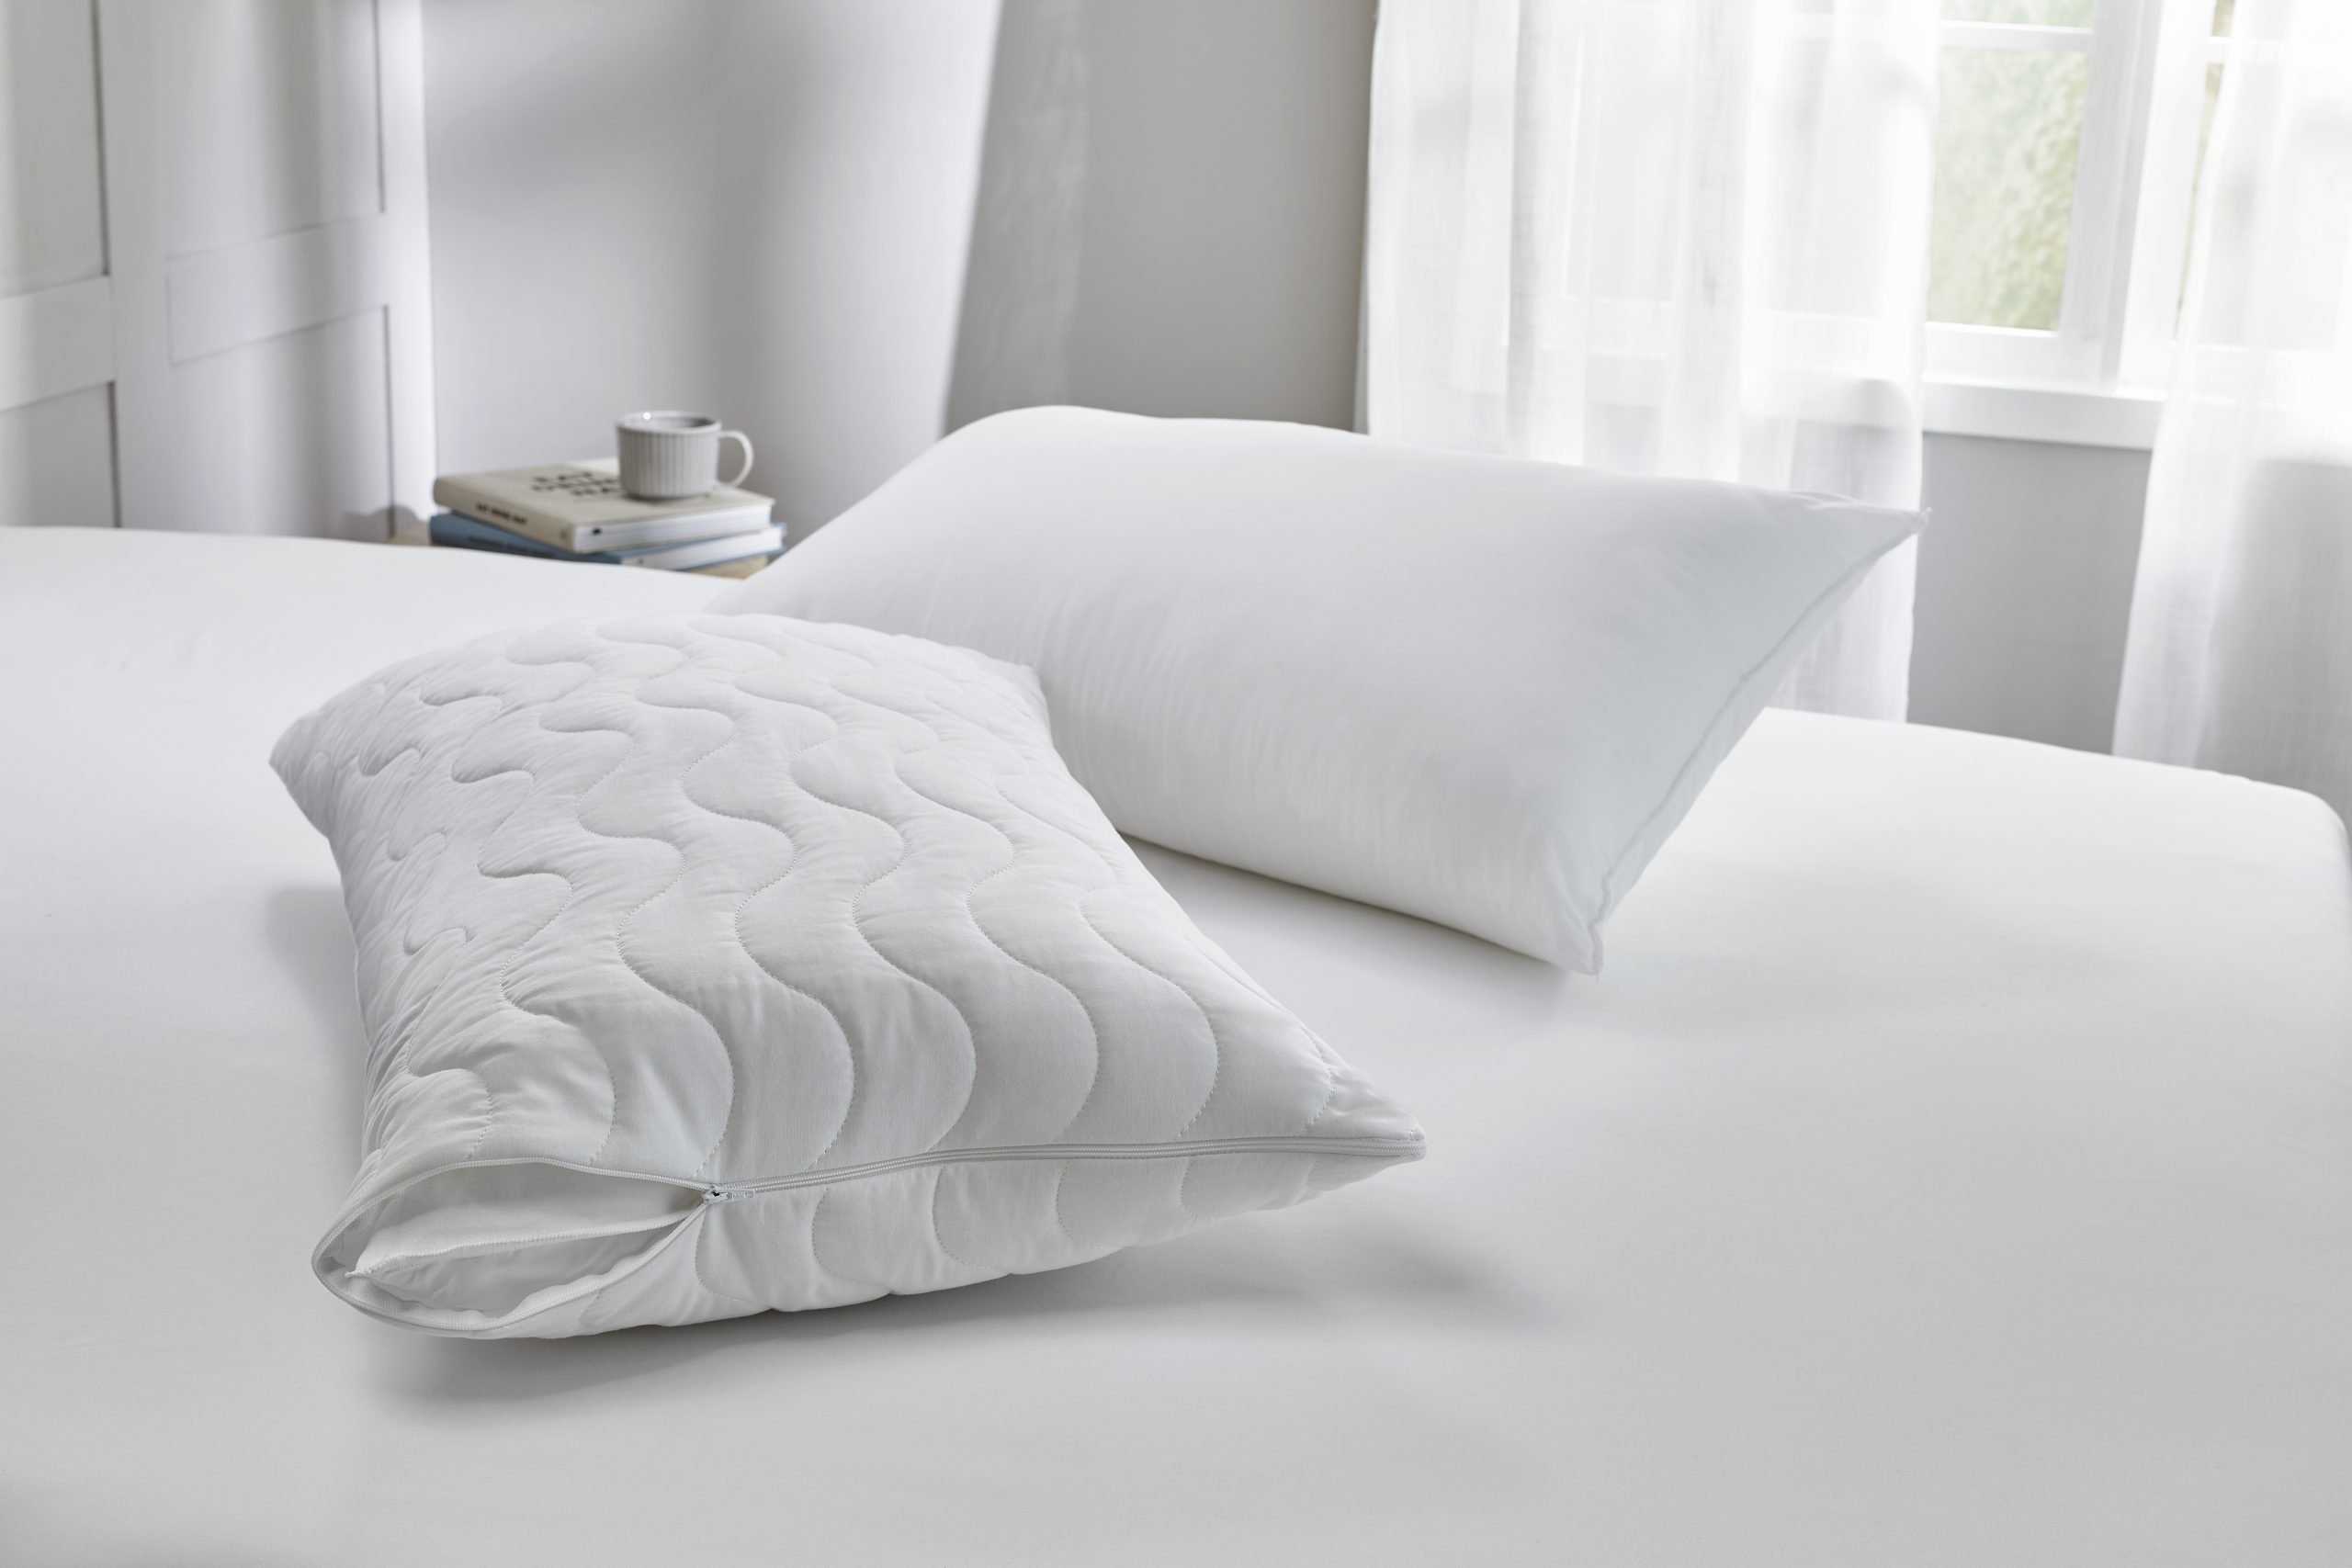 What Are The Best Firm Pillows